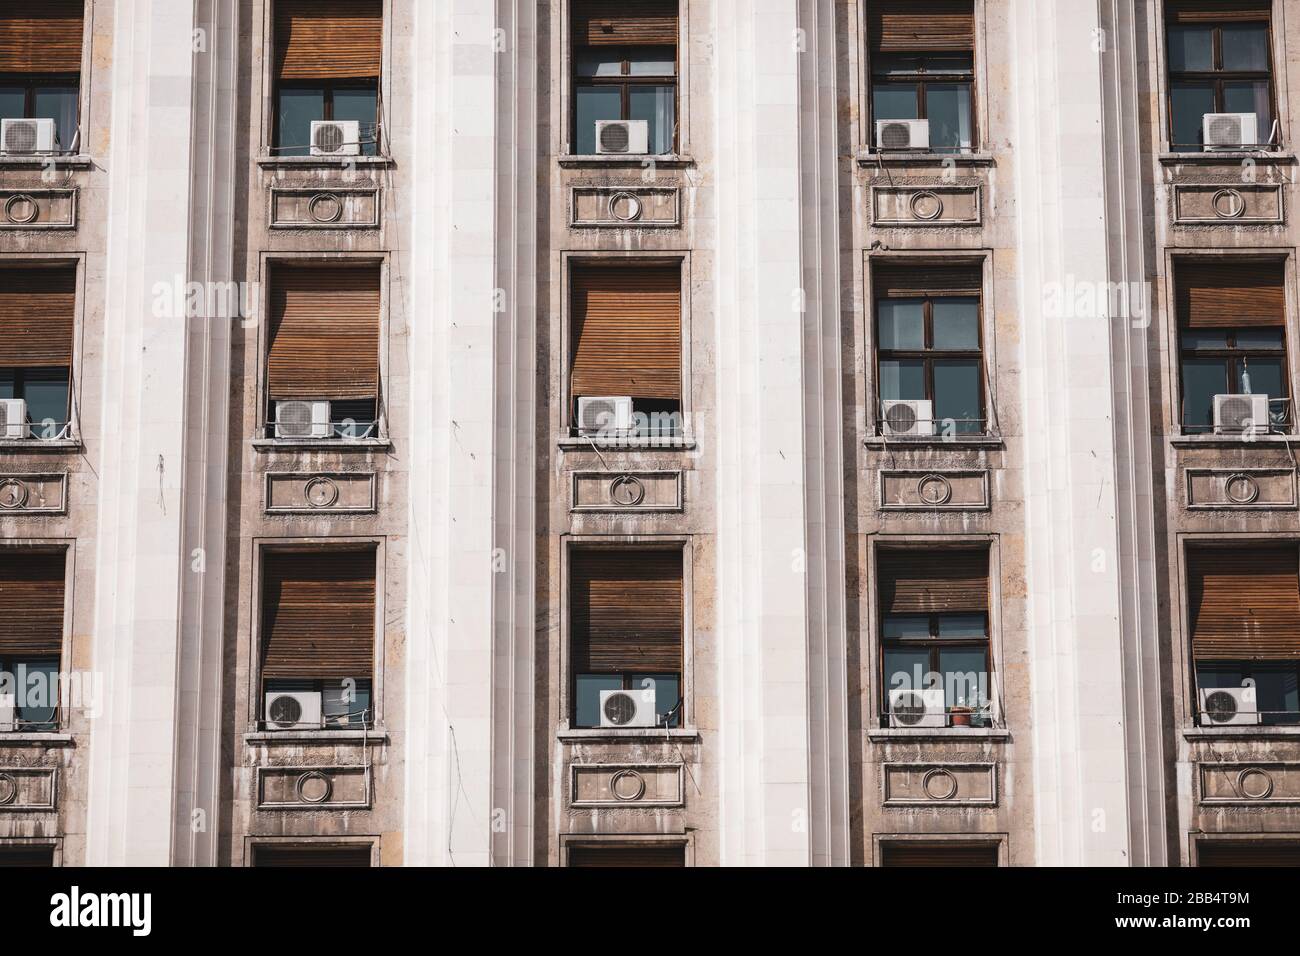 The exterior of an old soviet era style building with window air conditioning machines. Stock Photo